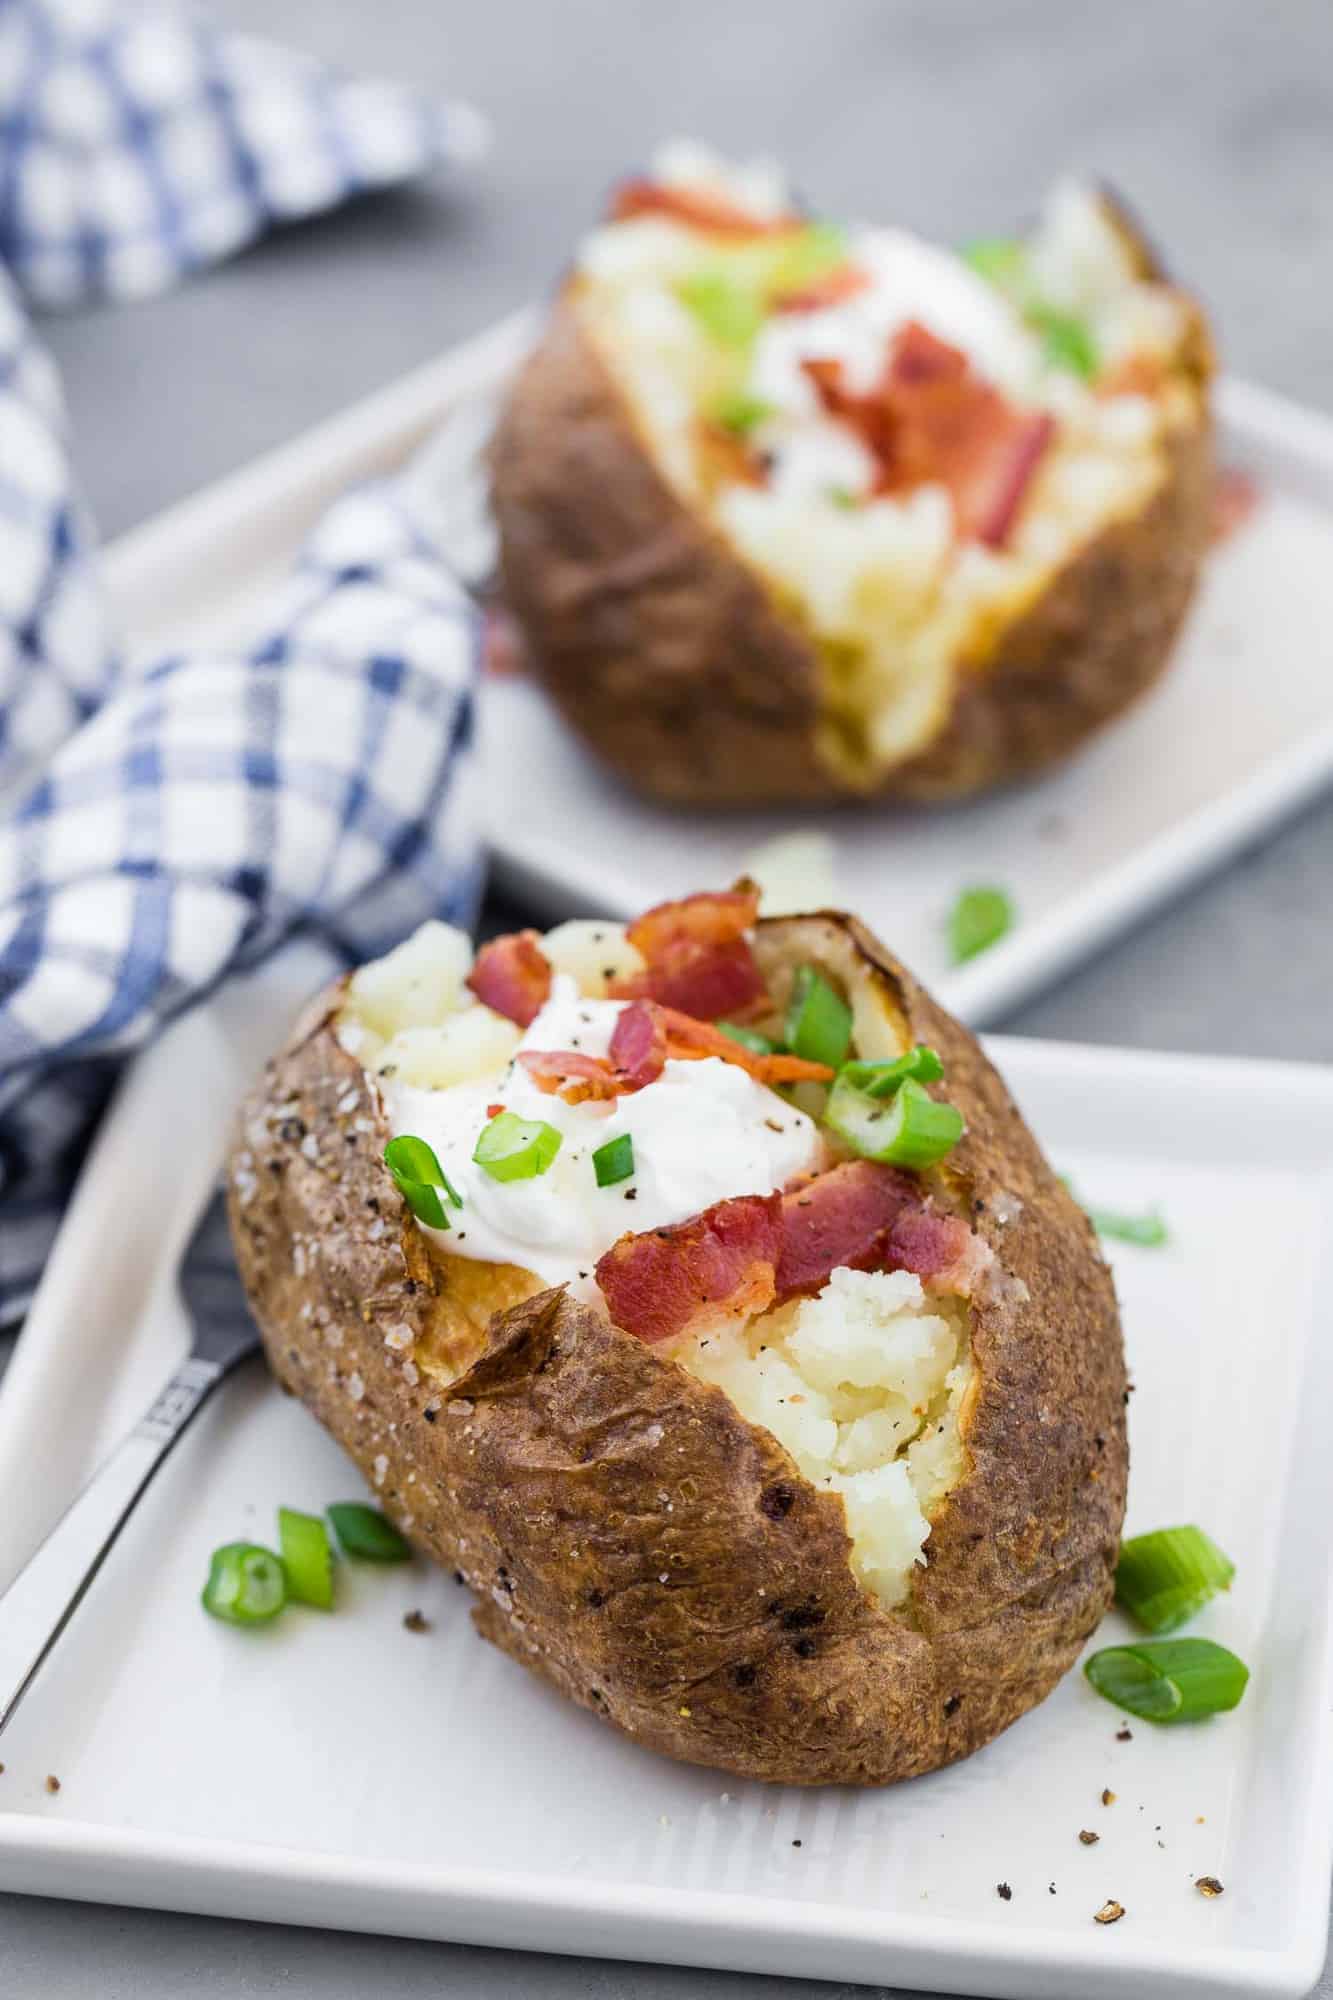 Baked potatoes on white plates, topped with sour cream, green onions, and bacon.